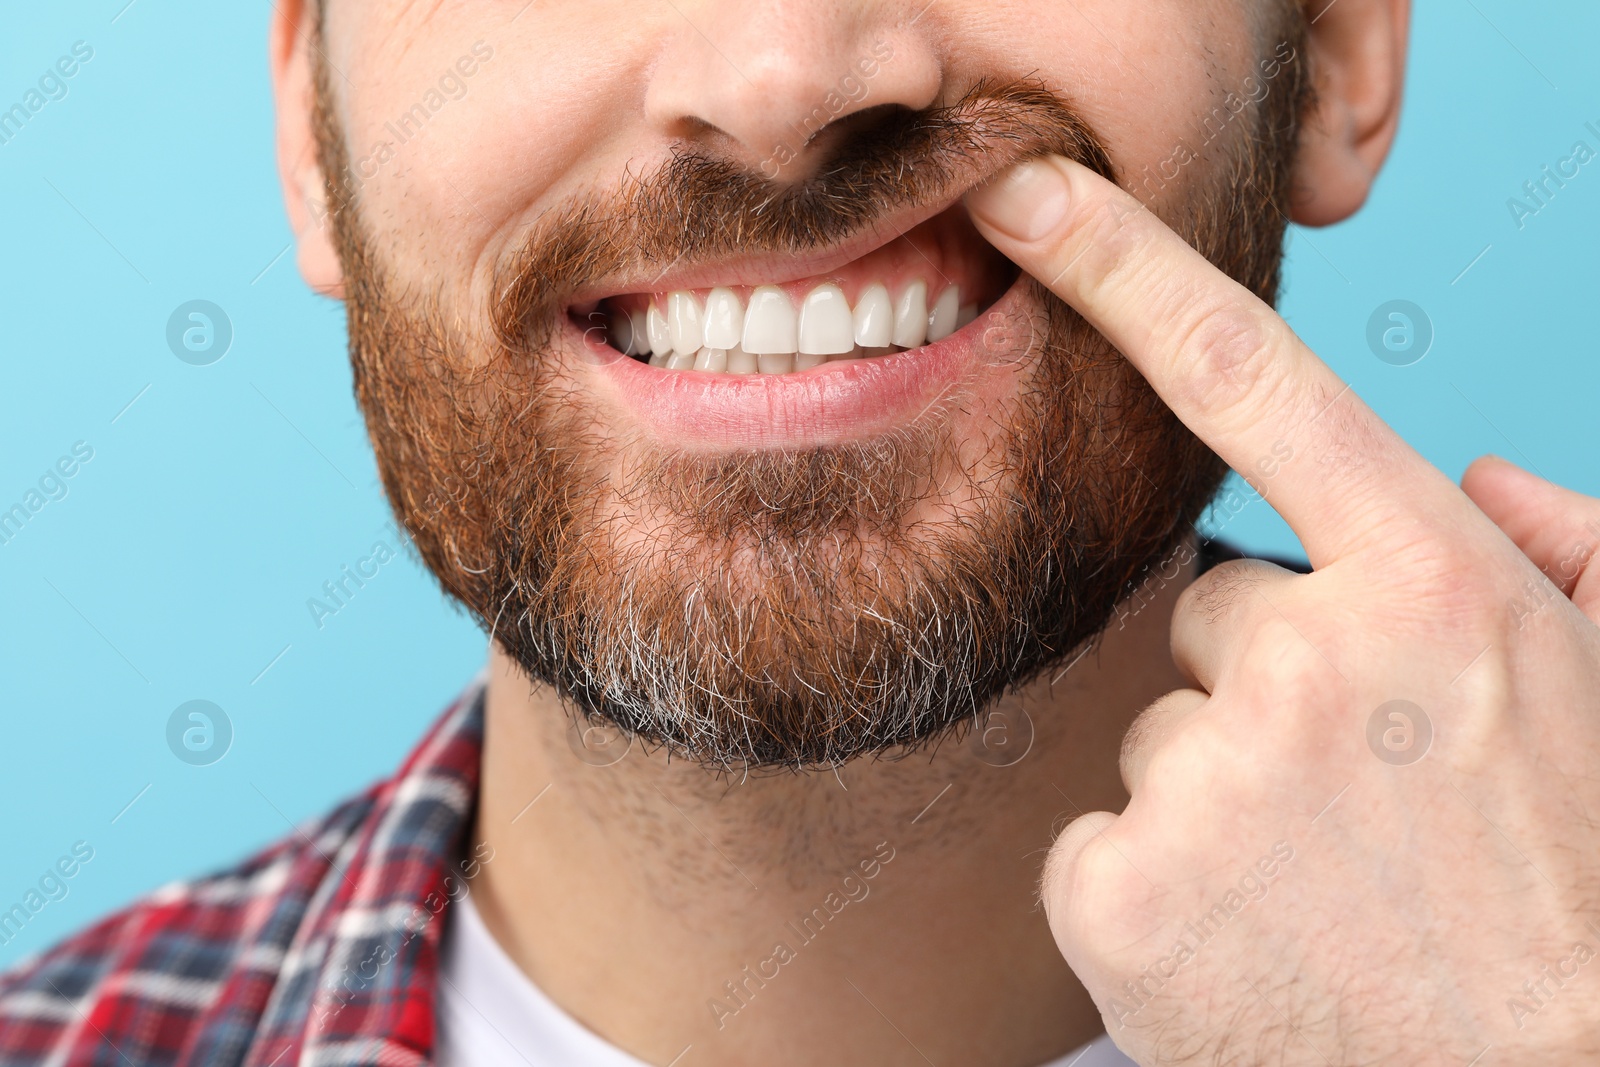 Photo of Man showing his healthy teeth and gums on light blue background, closeup